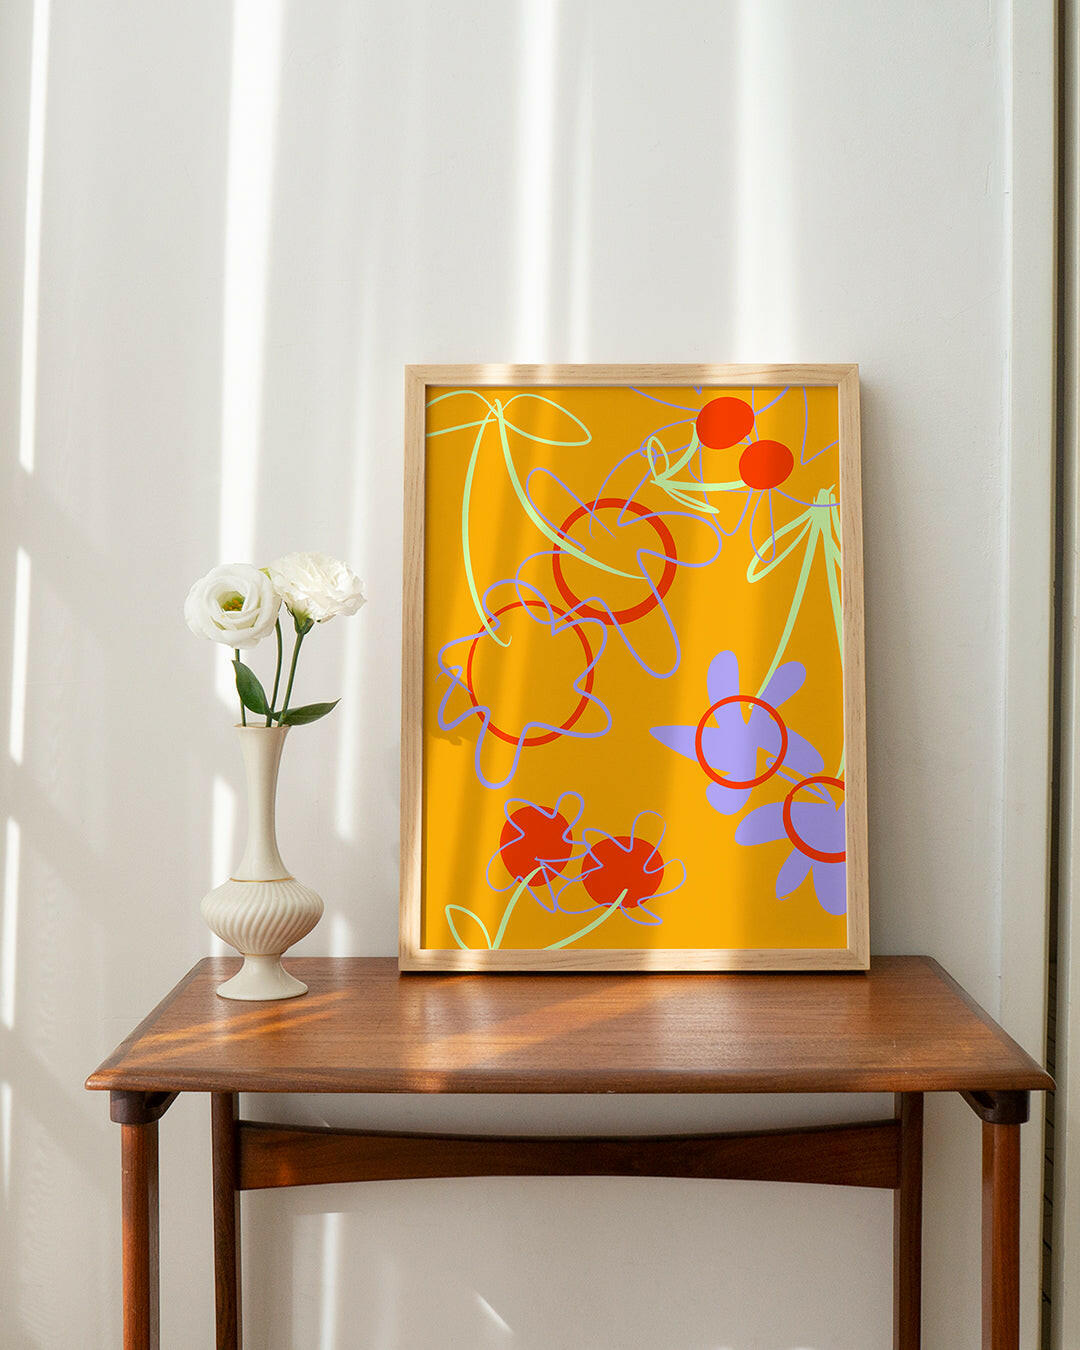 Wall art of an abstract cherry and flower design. Shown framed and resting on a desk.